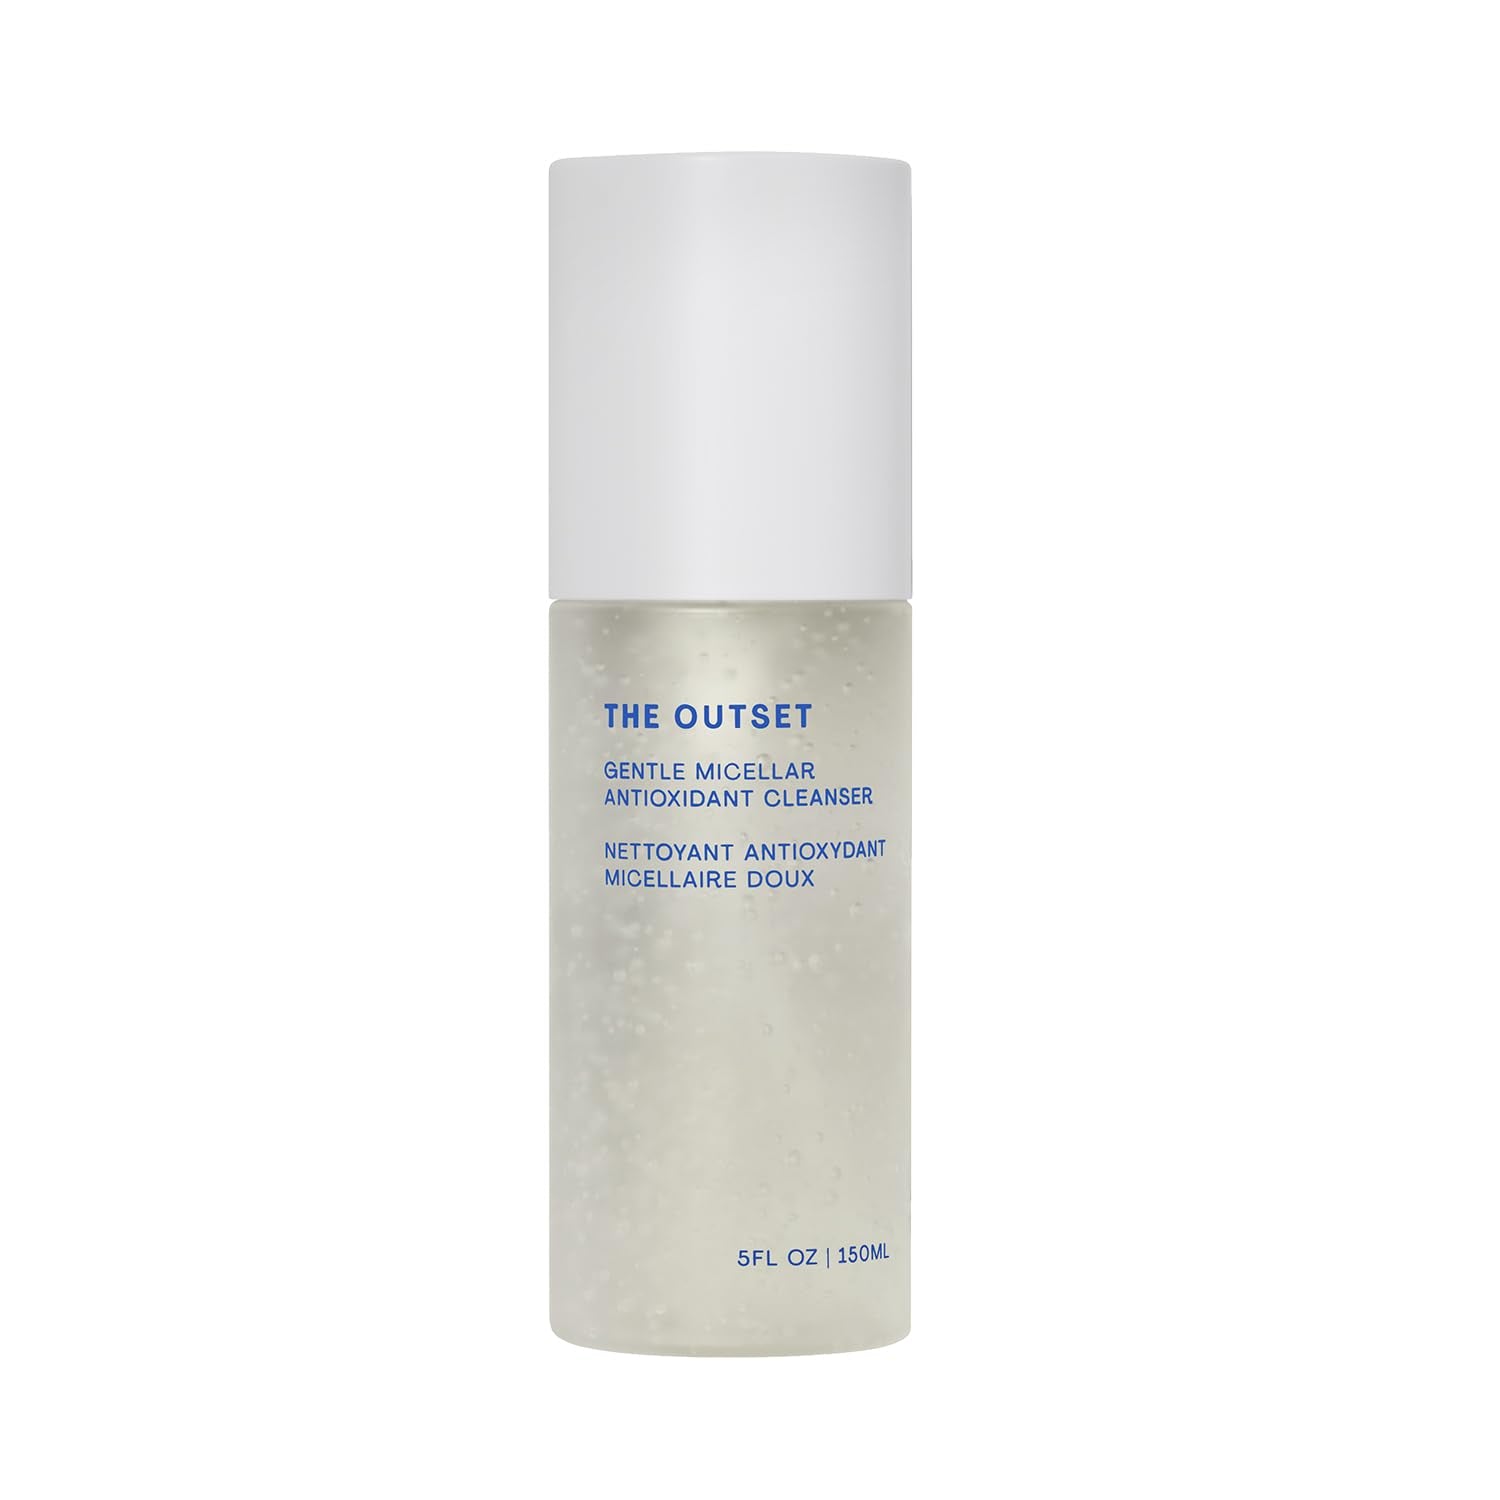 The Outset Gentle Micellar Antioxidant Cleanser - Gel Face Wash + Makeup Remover - Hydrating and Brightening - Fragrance Free for Sensitive Skin - Clean, Vegan, Gluten Free, All Skin Types - 5 fl oz